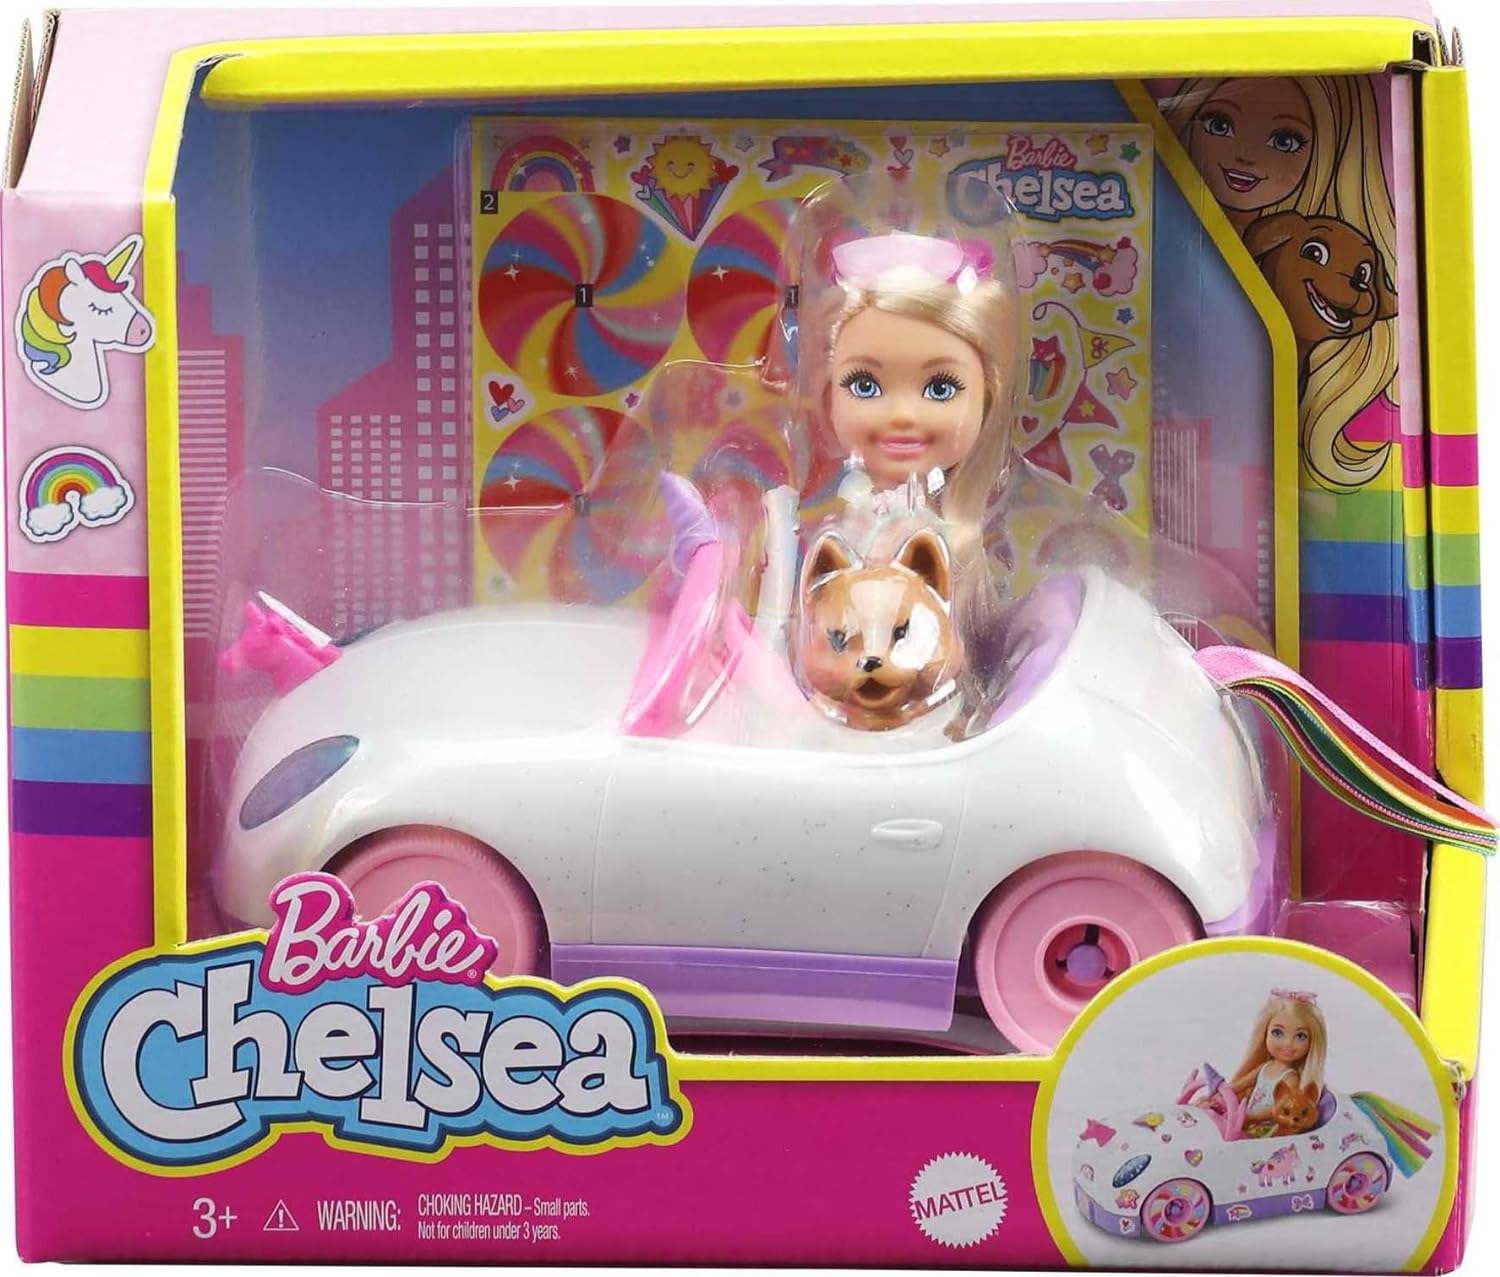 Barbie Club Chelsea Doll (6-inch Blonde) with Open-Top Rainbow Unicorn-Themed Car, Pet Puppy, Sticker Sheet & Accessories, For 3 to 7 Year Olds